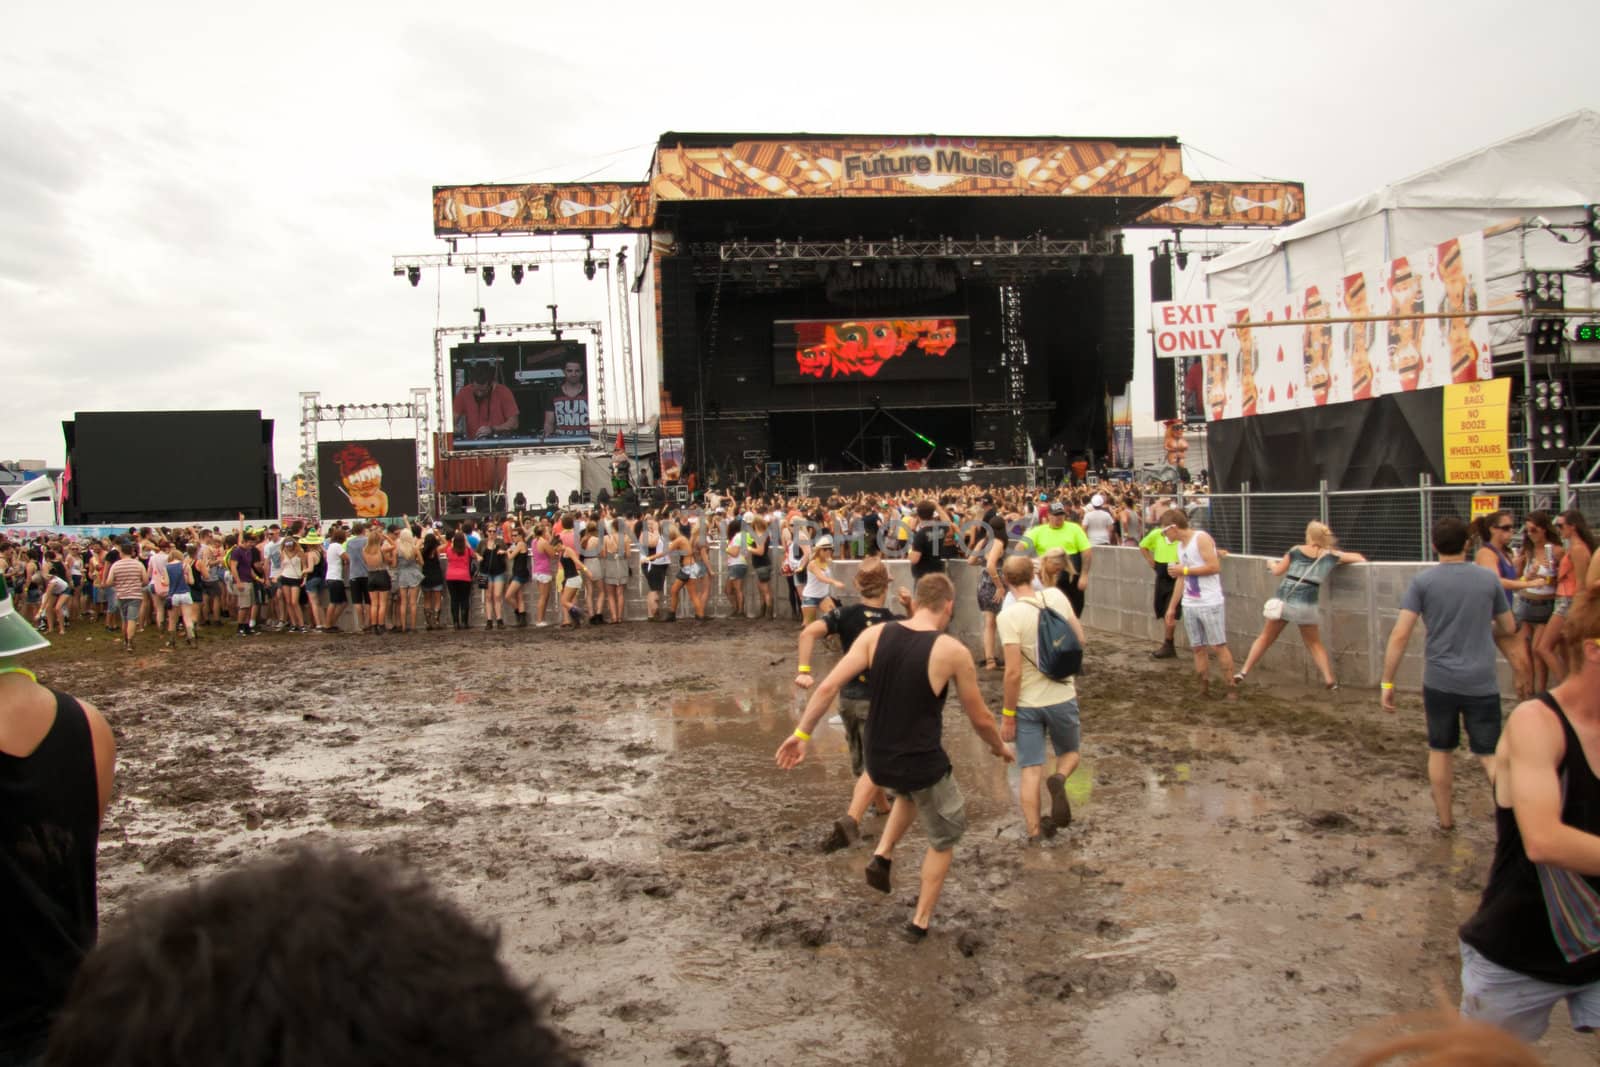 People dancing in the mud at the Future Musical Festival 2011 at Brisbane Australia.